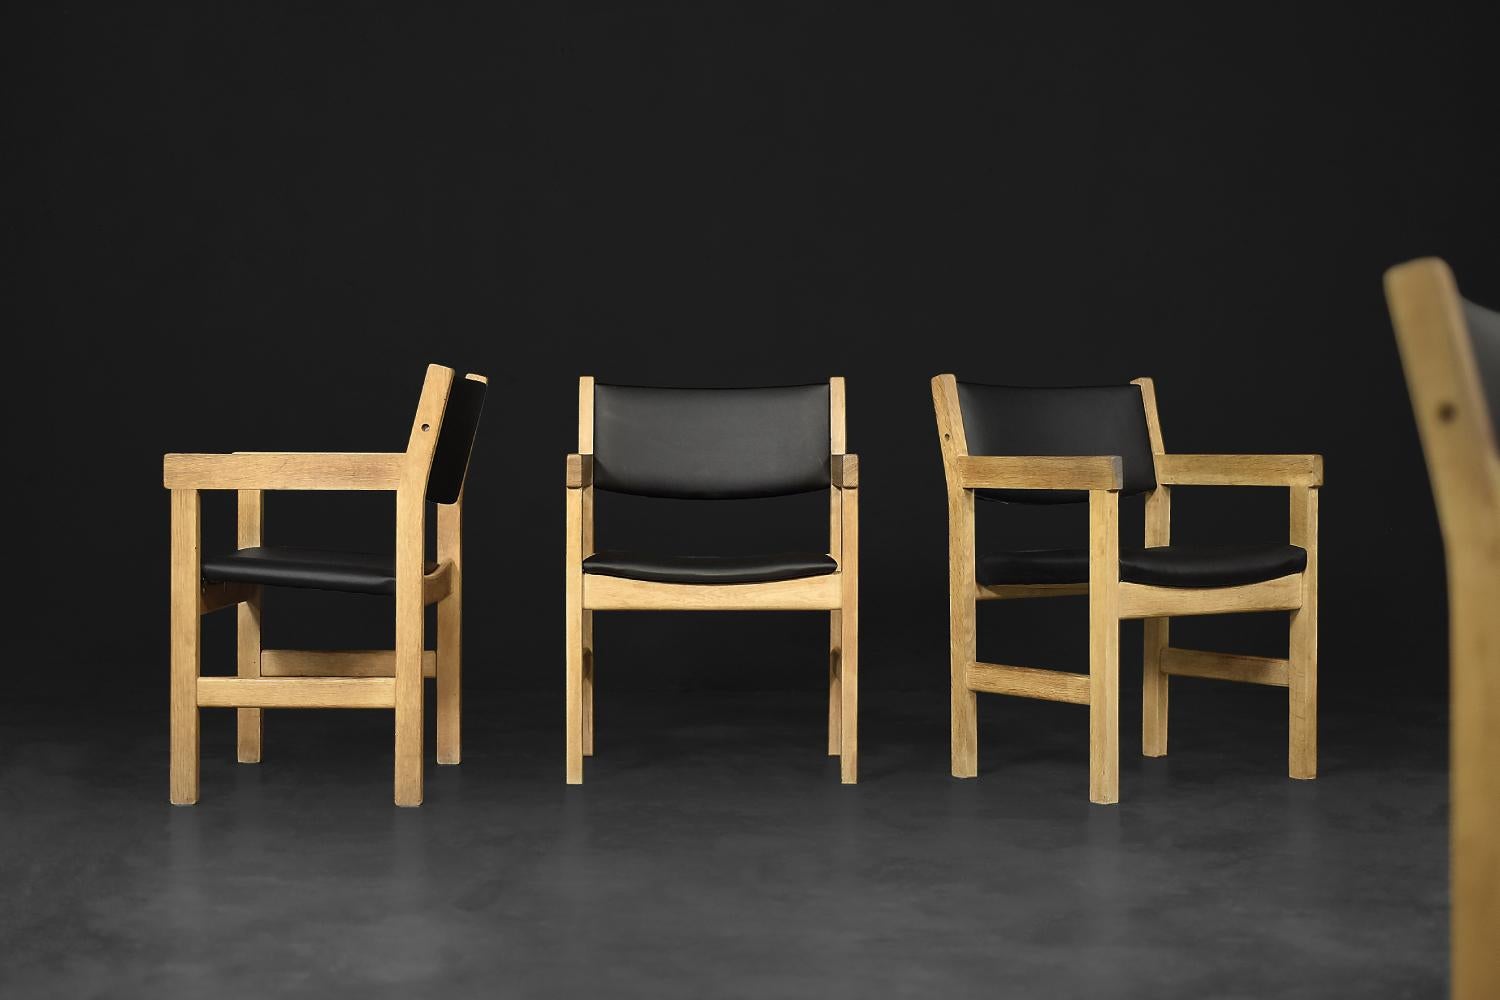 This set of four chairs was designed by Hans J. Wegner for the Danish manufacturer Getama Gedsted during the 1960s. The raw, geometric frame of the chair is made of light oak wood. The seat and backrest are upholstered with high-quality black vinyl.